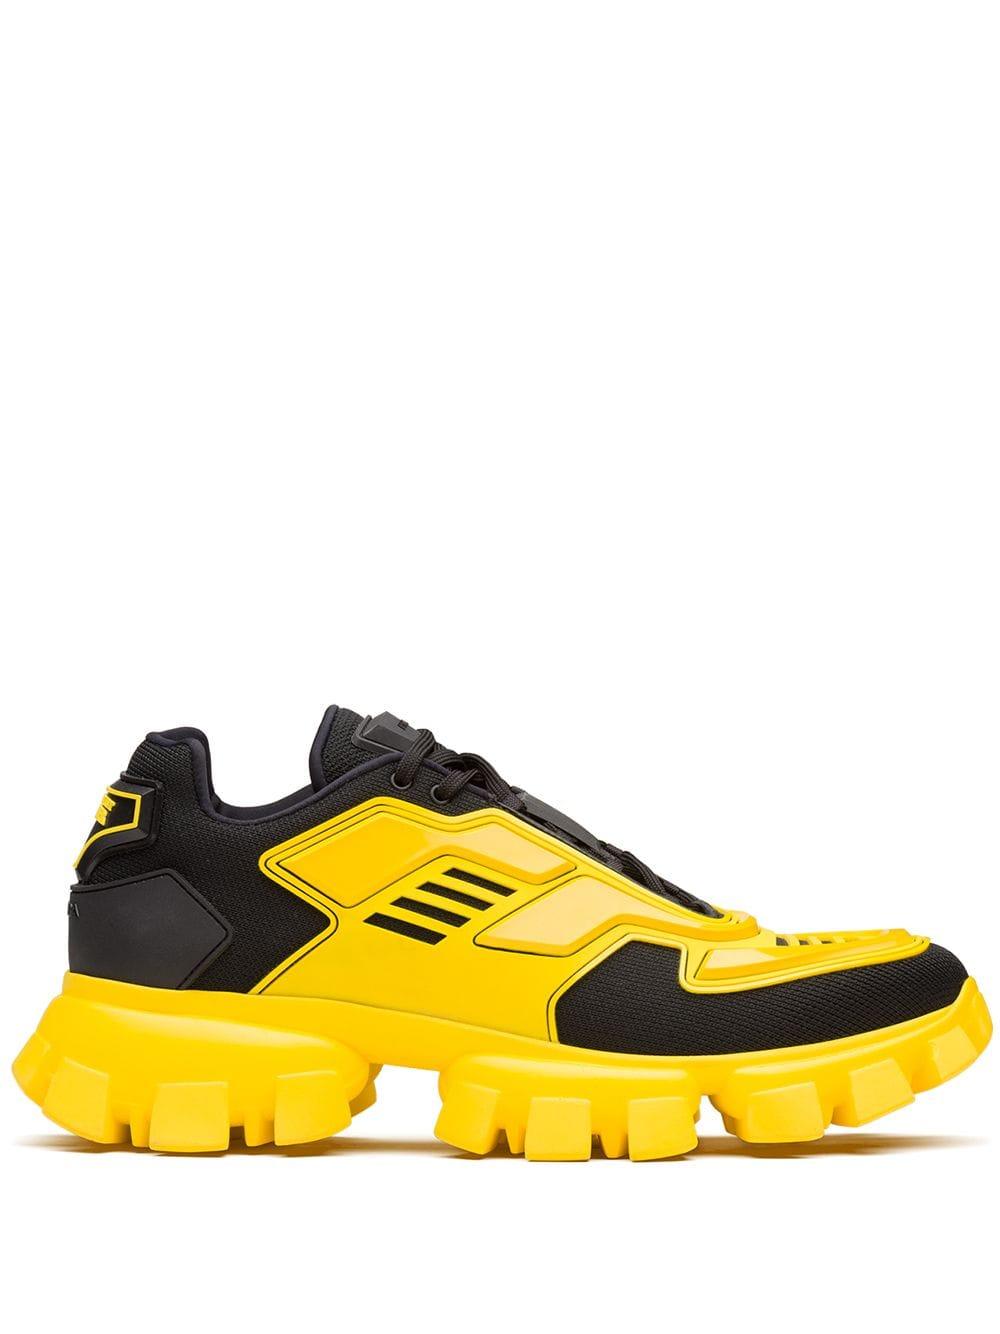 Prada Synthetic Cloudbust Thunder Sneakers in Yellow for Men - Save 1% ...